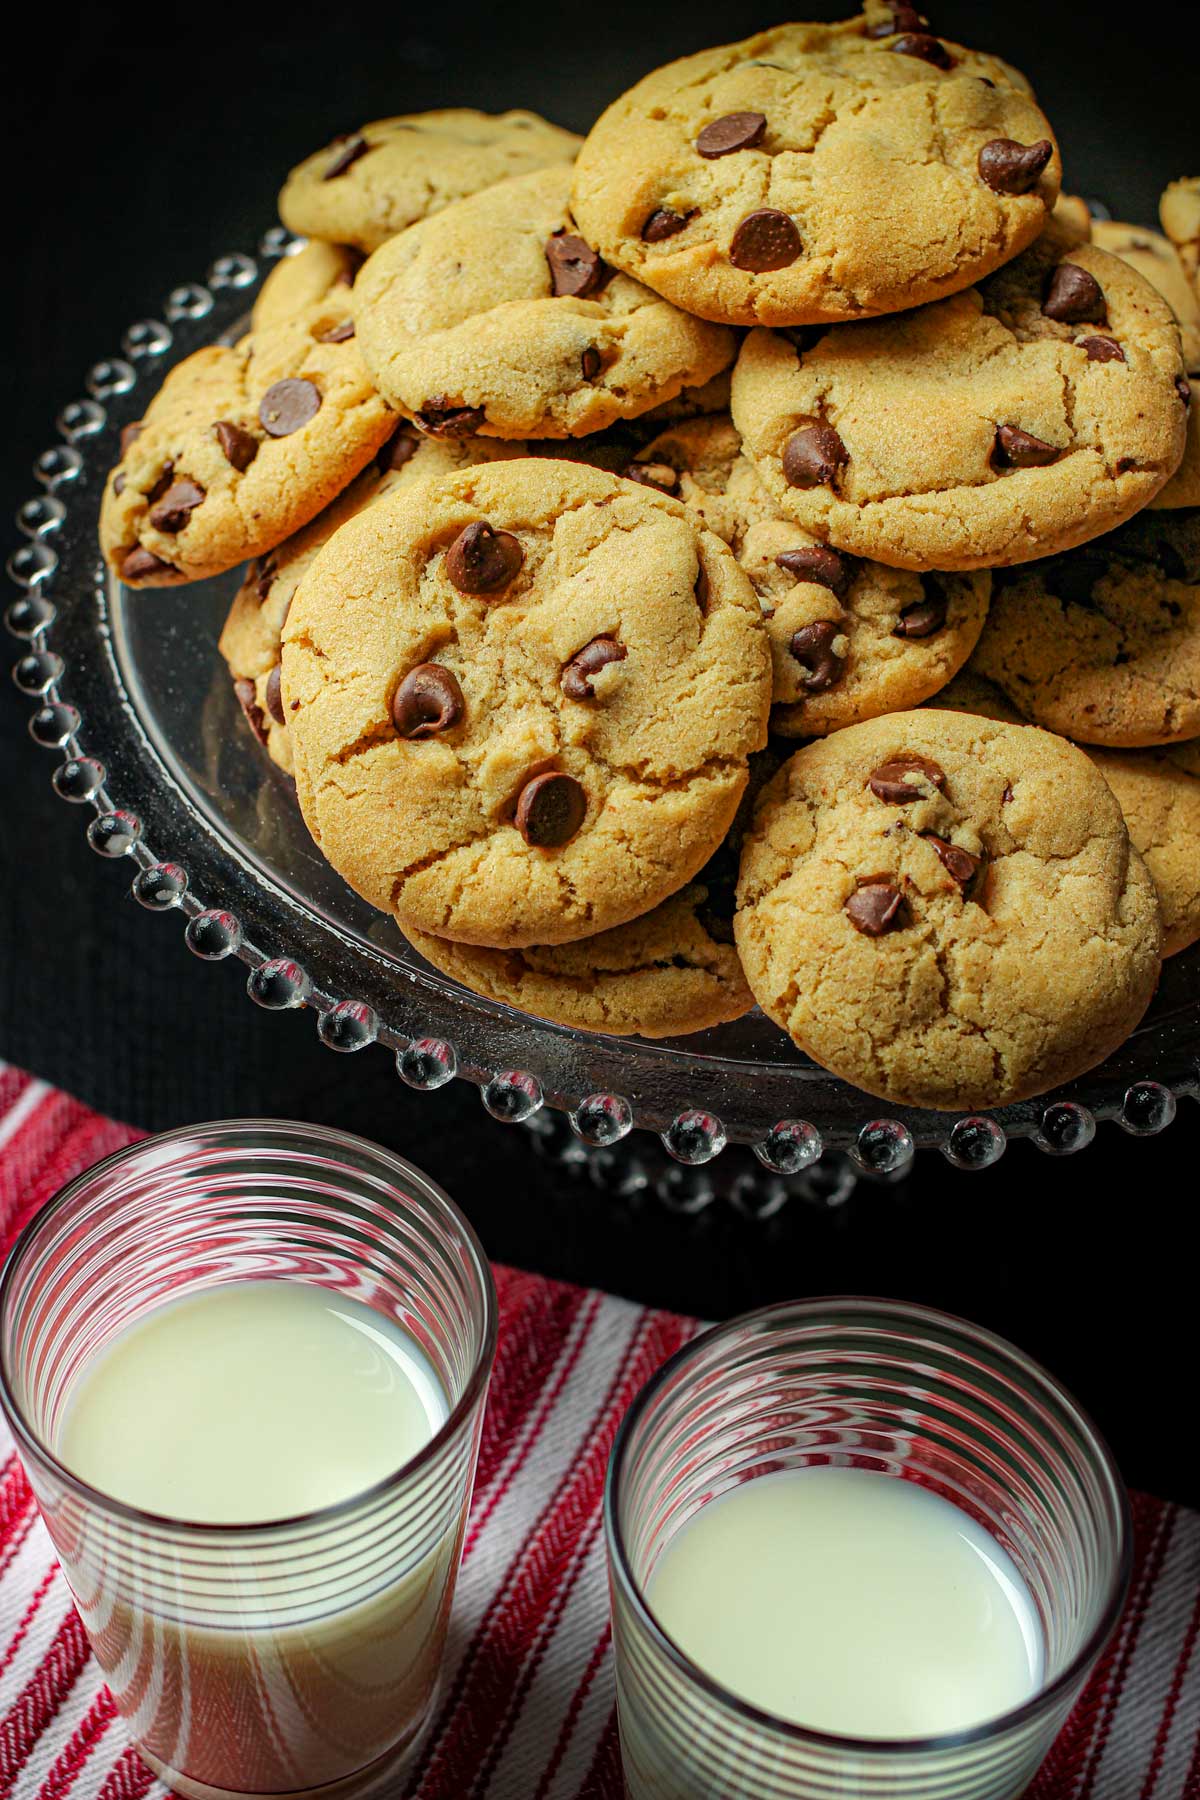 platter of chocolate chip cookies next to two glasses of milk.